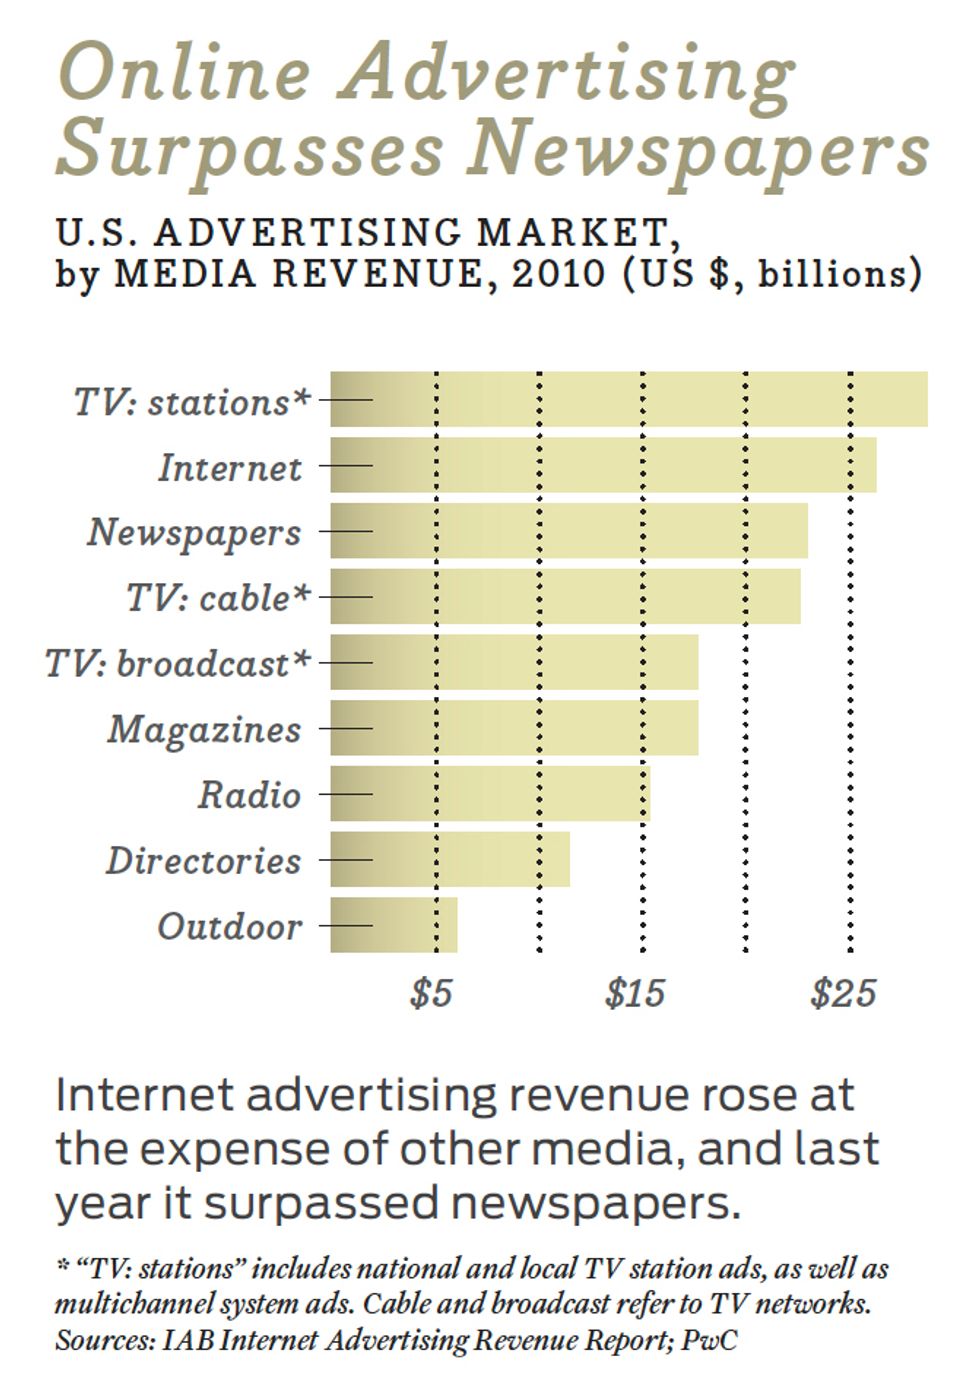 graphic, online ad surpasses newspapers 